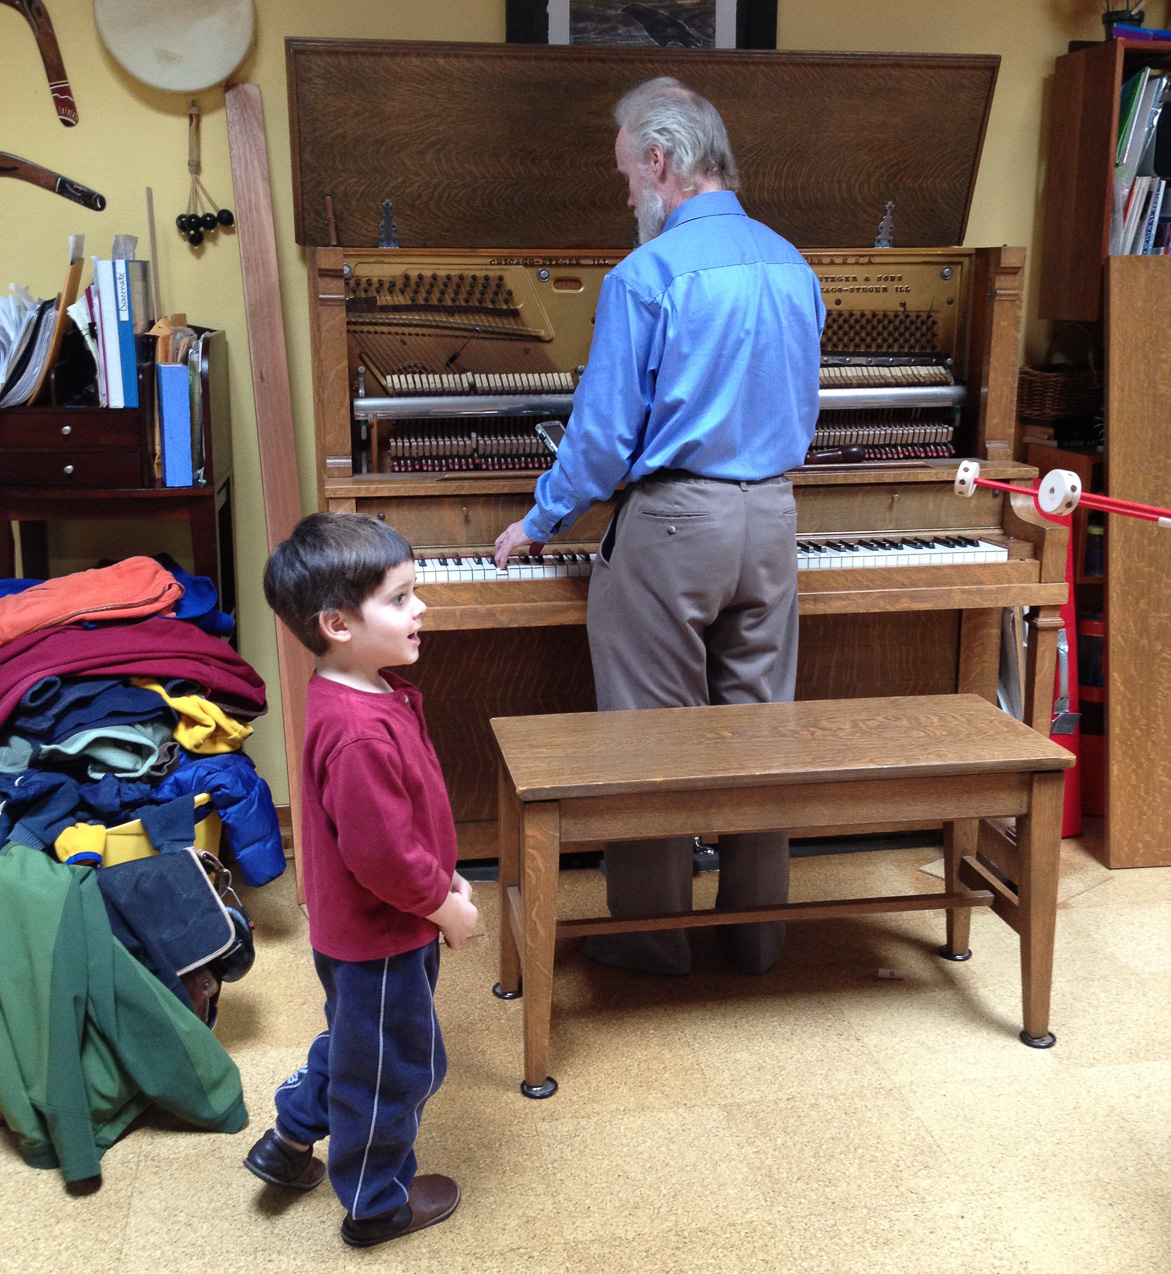  December 06, 2012 - Seeing the piano being tuned